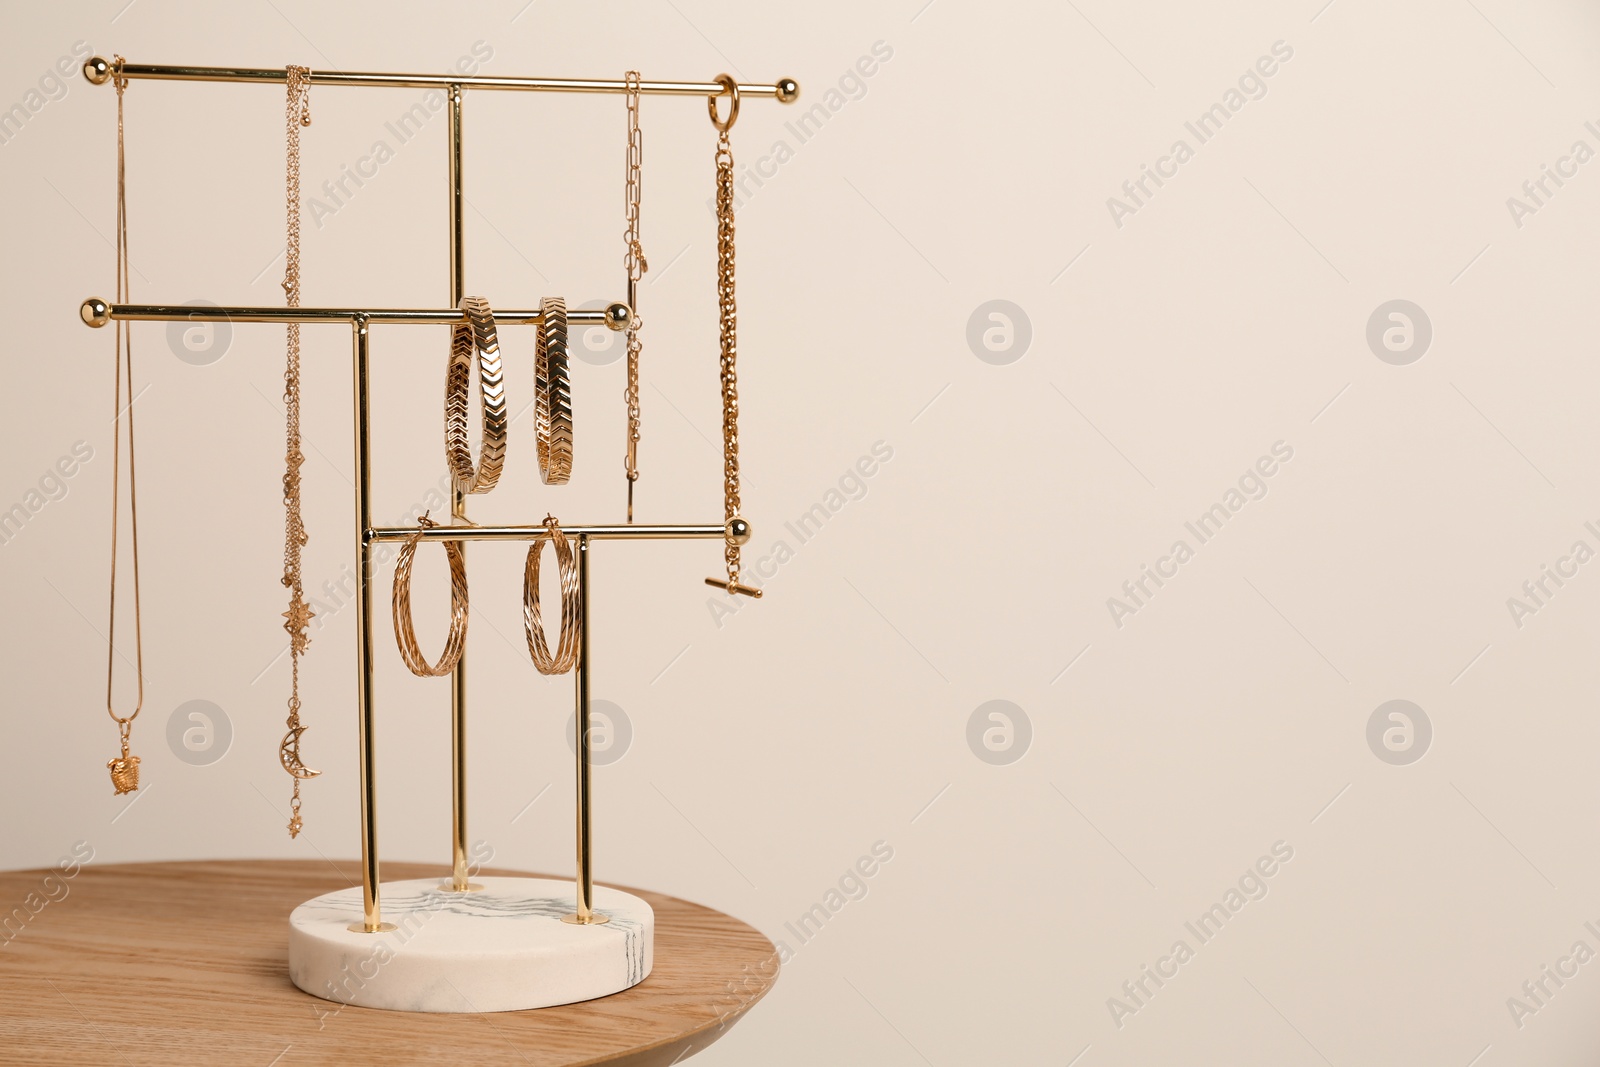 Photo of Holder with set of luxurious jewelry on wooden table. Space for text